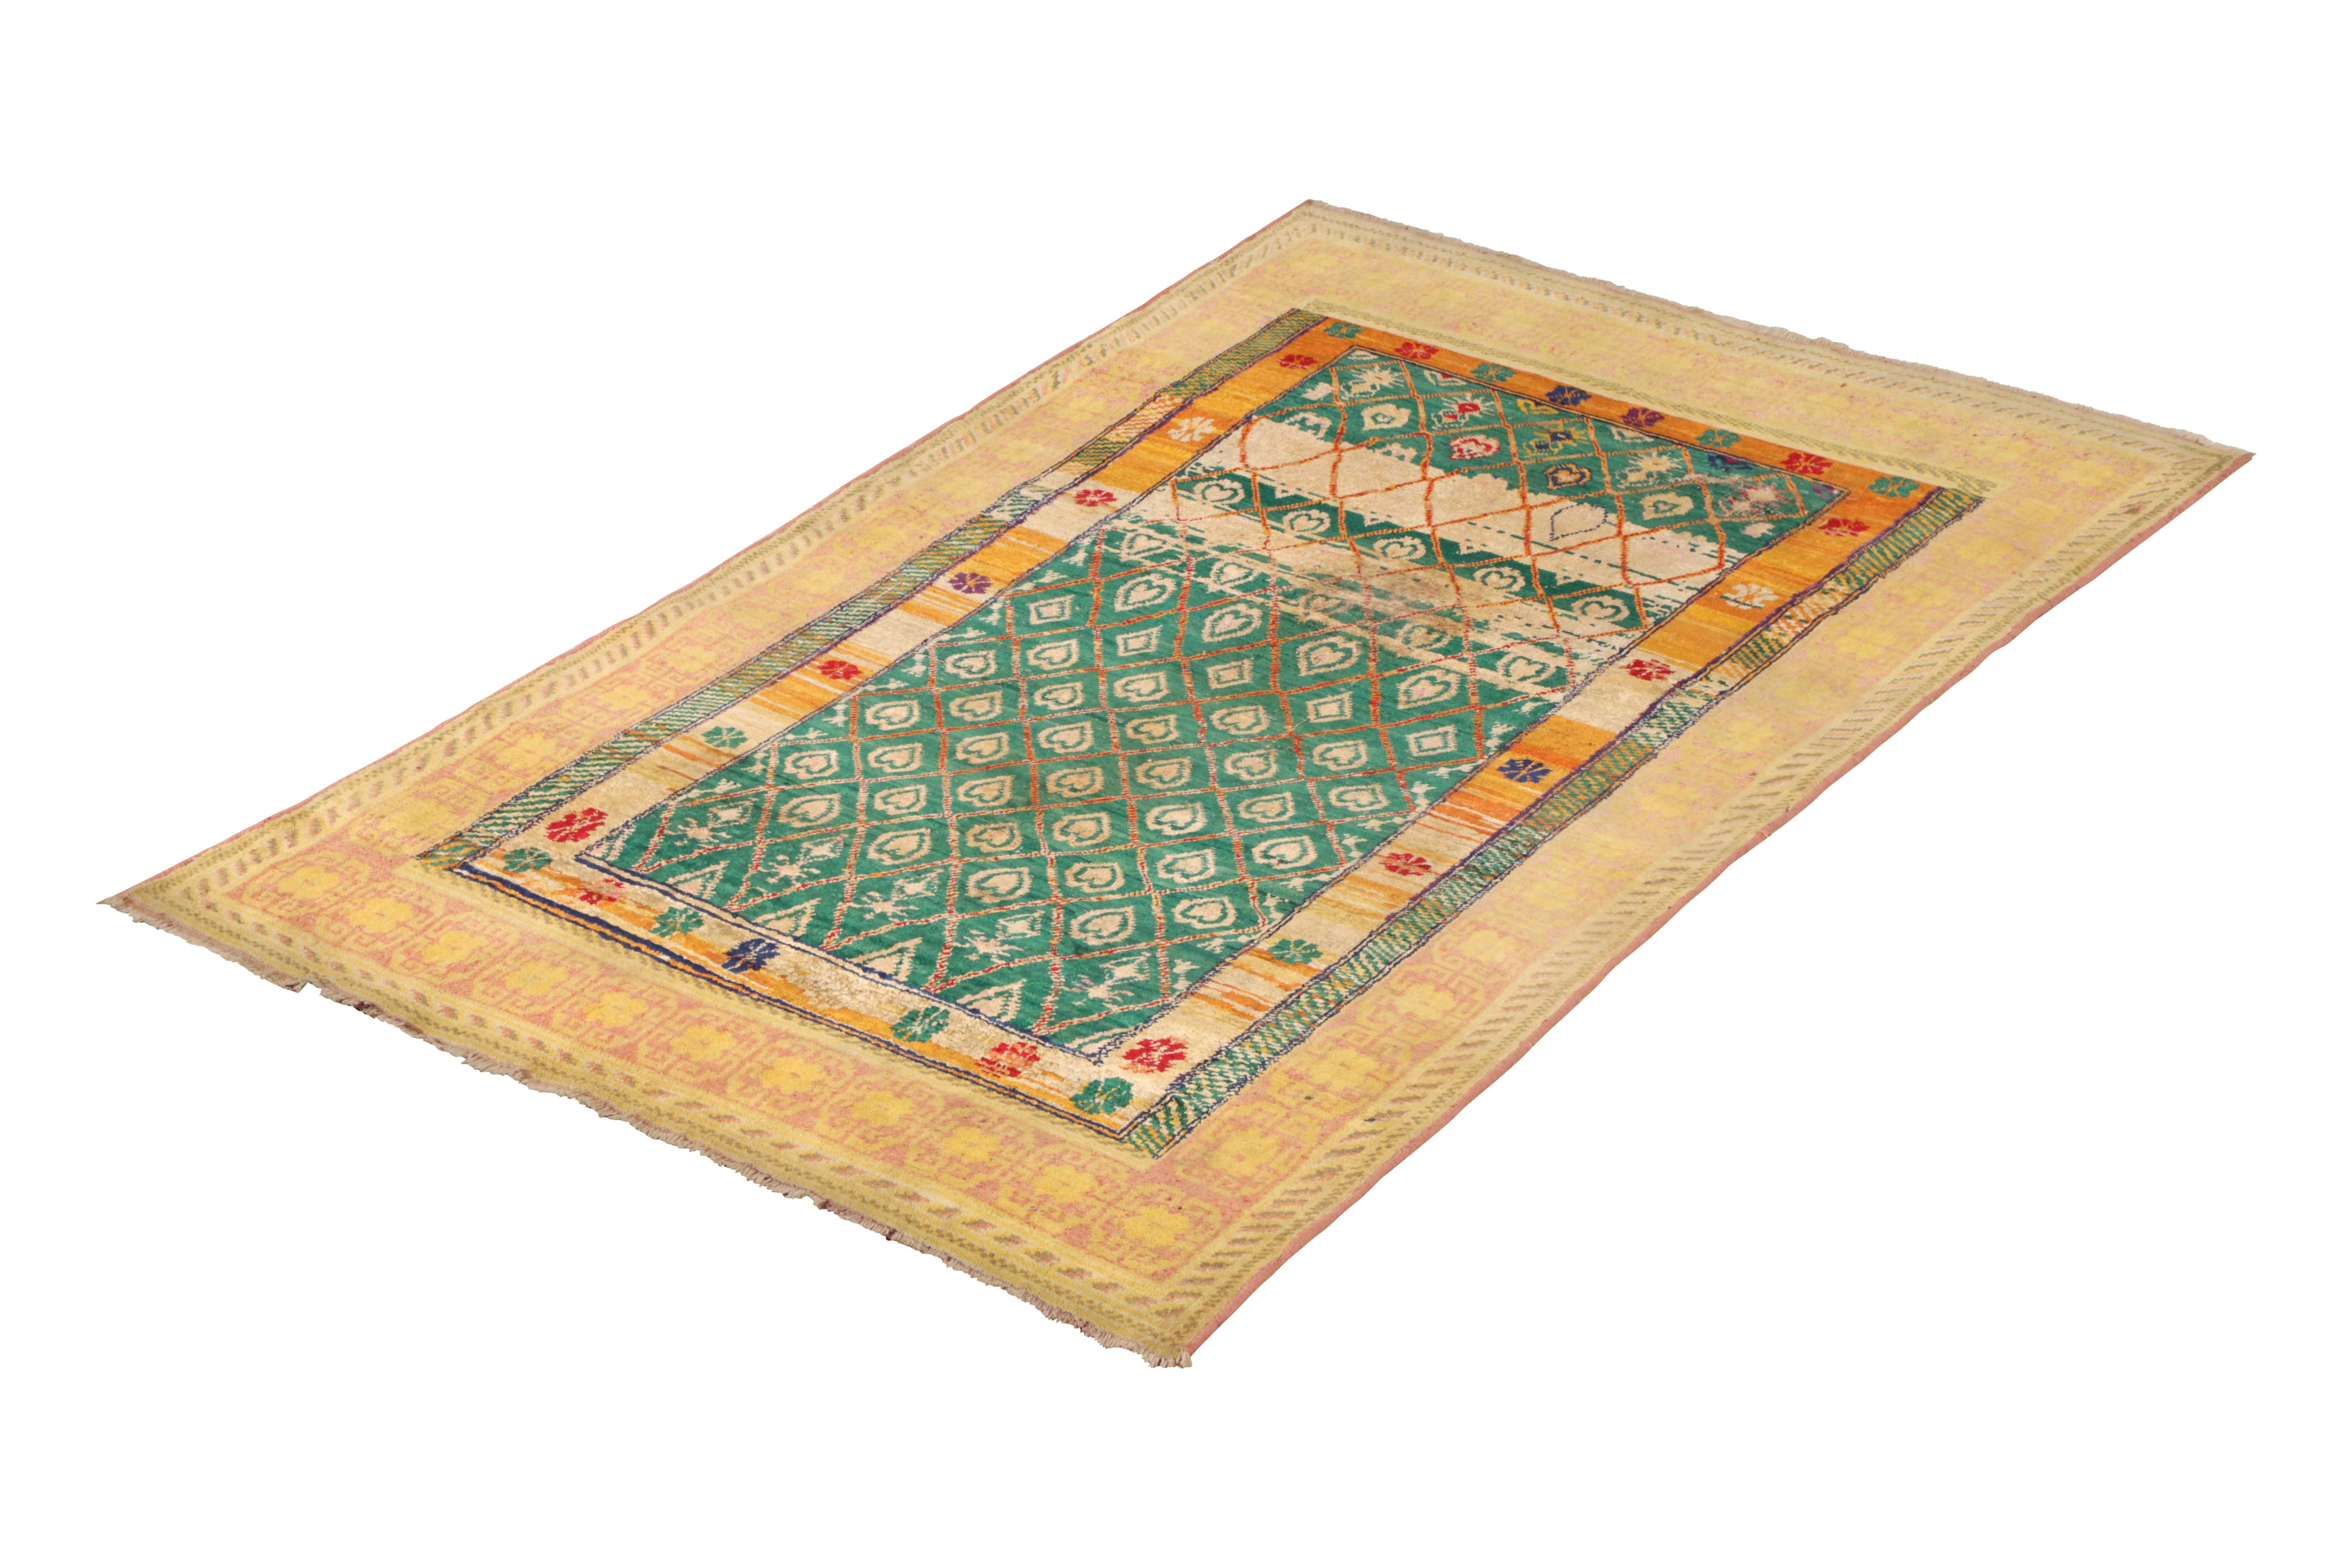 Hand knotted in a fabulous cotton and silk blend originating from India circa 1910-1920, this antique rug connotes a rare Agra rug design favoring unique green and yellow colorways in a geometric tribal pattern. The silk’s natural luster brings out